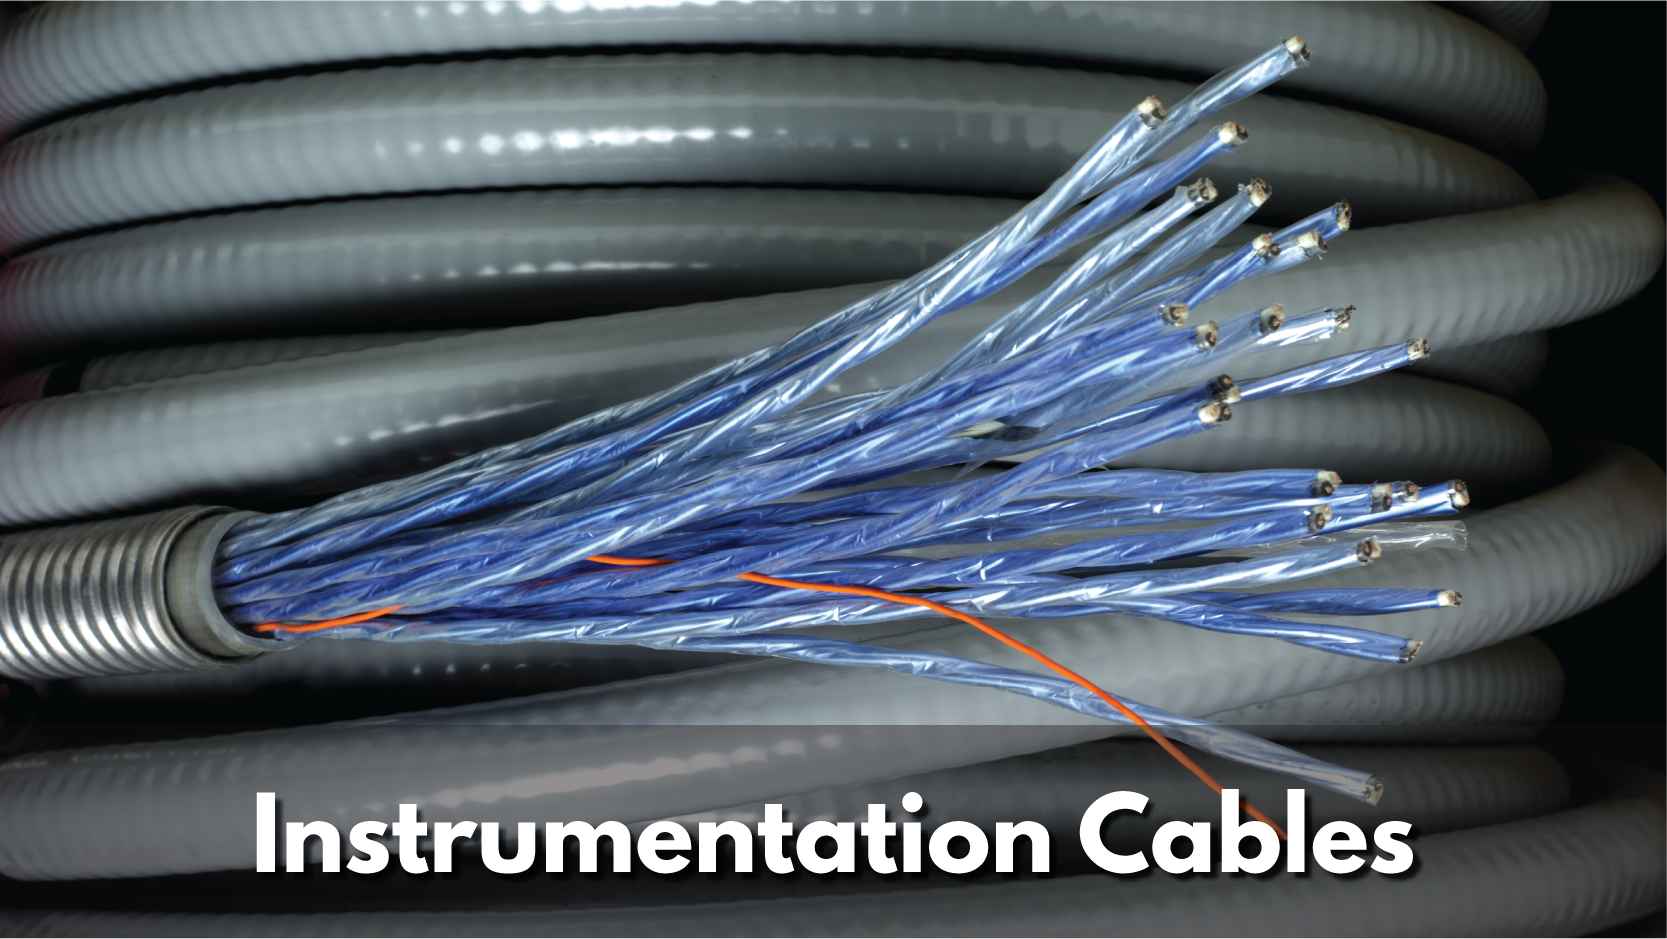 Texcan - View All Products - Instrumentation Cables